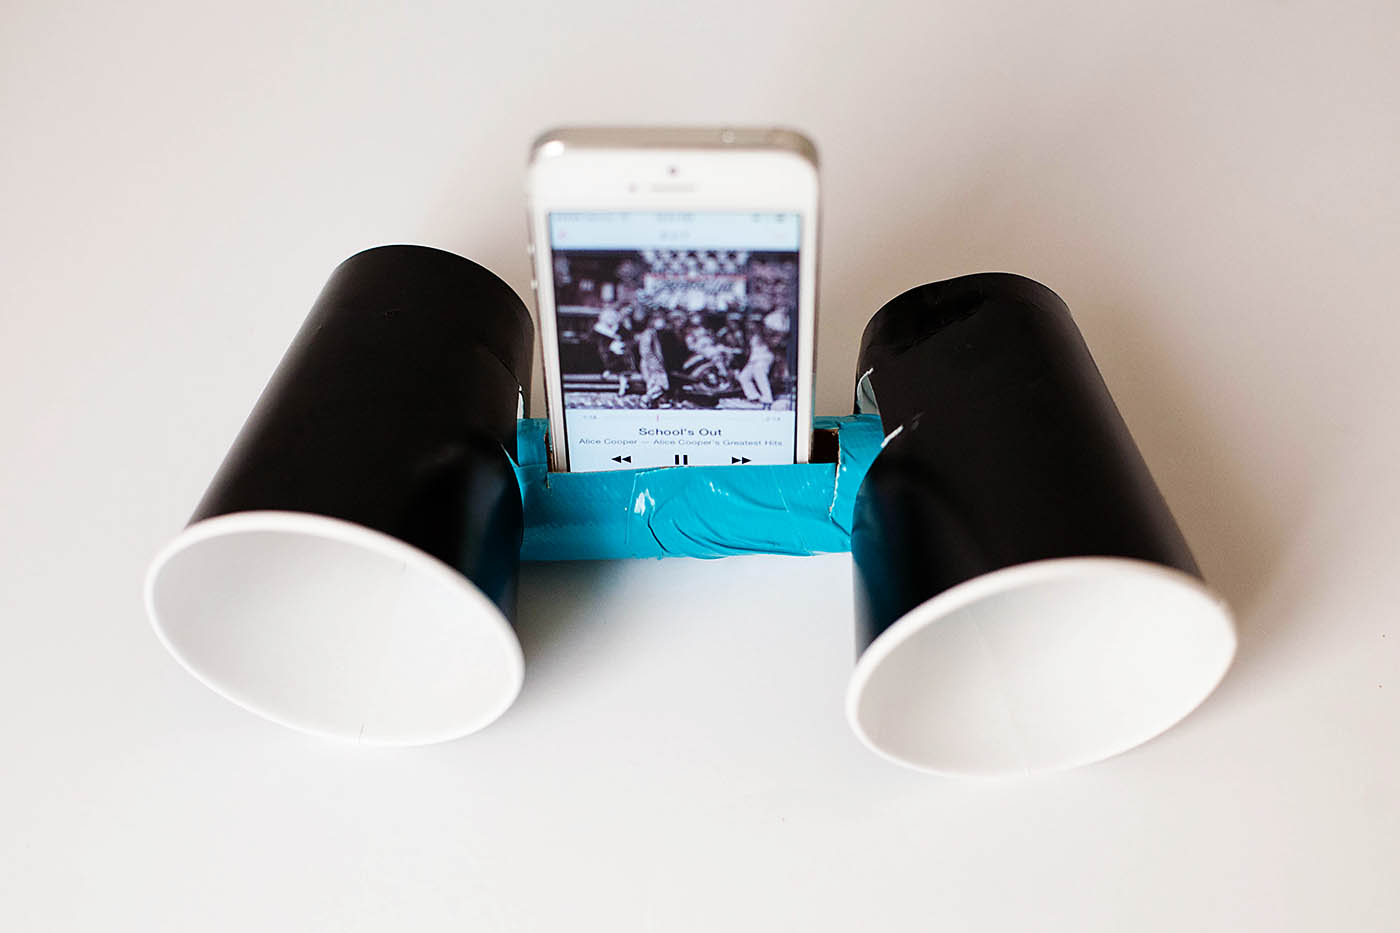 DIY speakers from All for the Boys blog